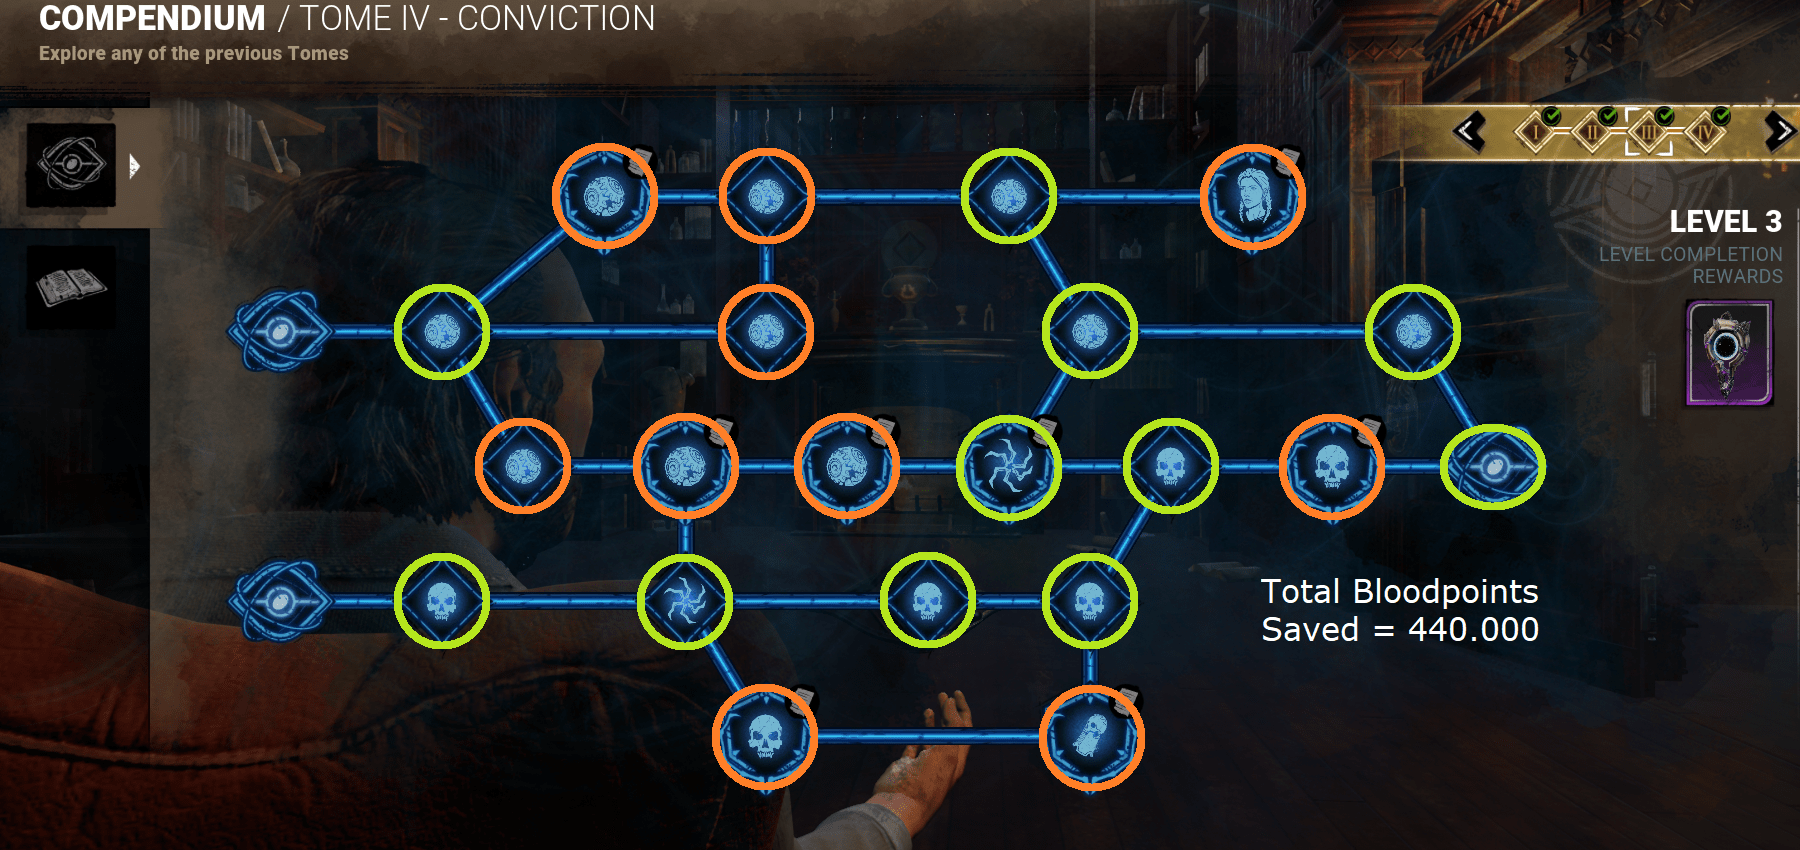 Dead by Daylight - Best Archive Paths for most reserved Bloodpoints